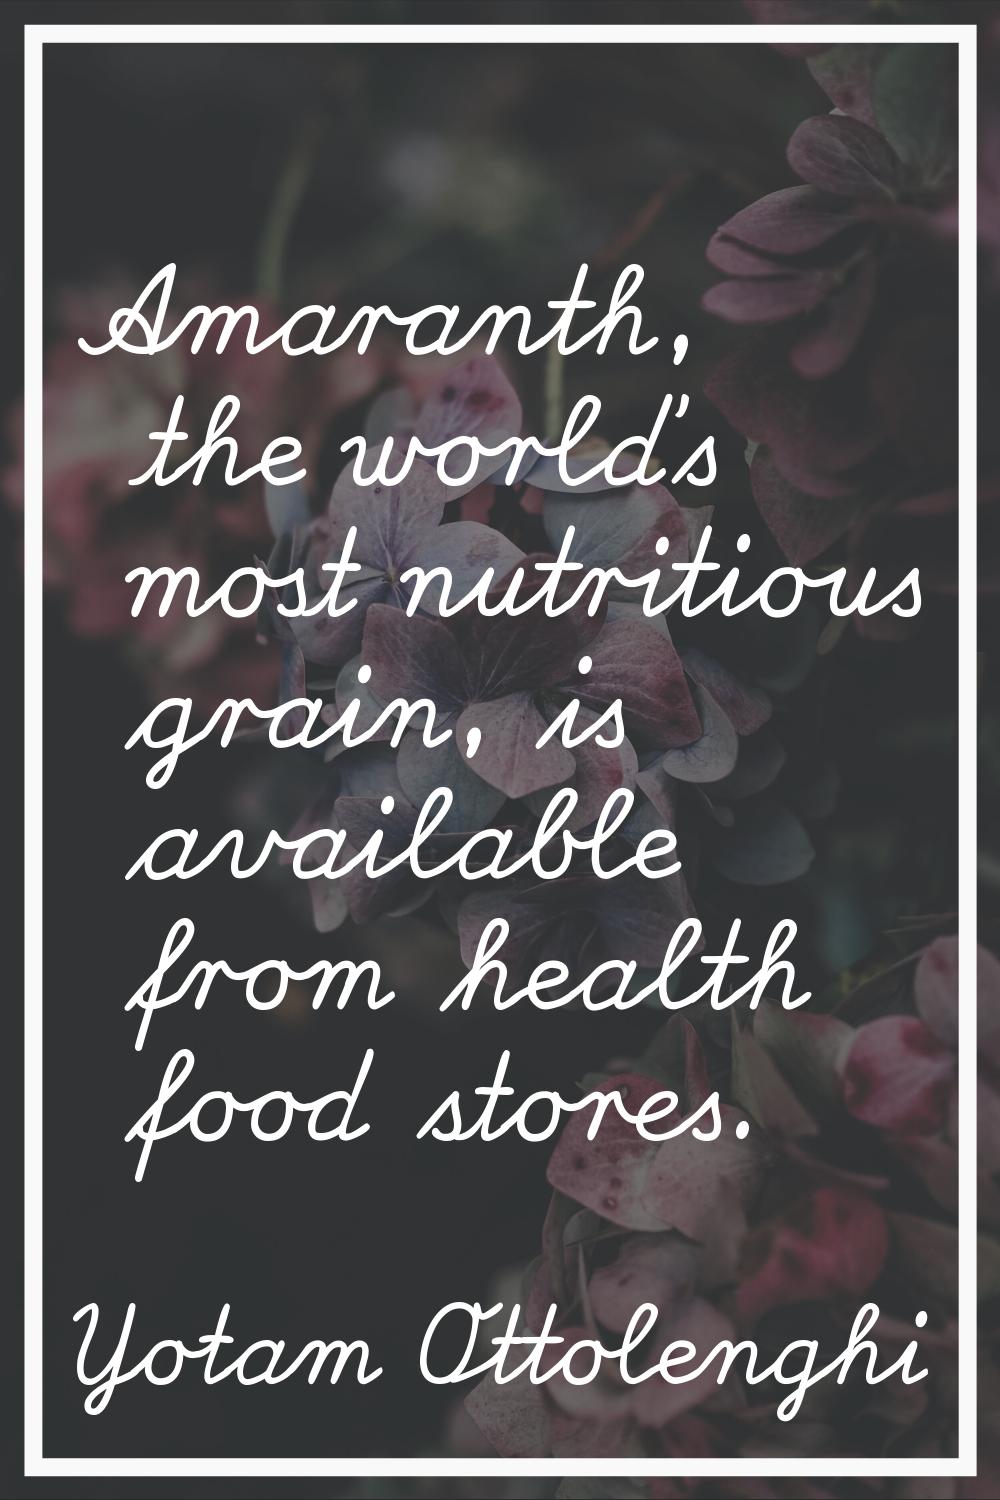 Amaranth, the world's most nutritious grain, is available from health food stores.